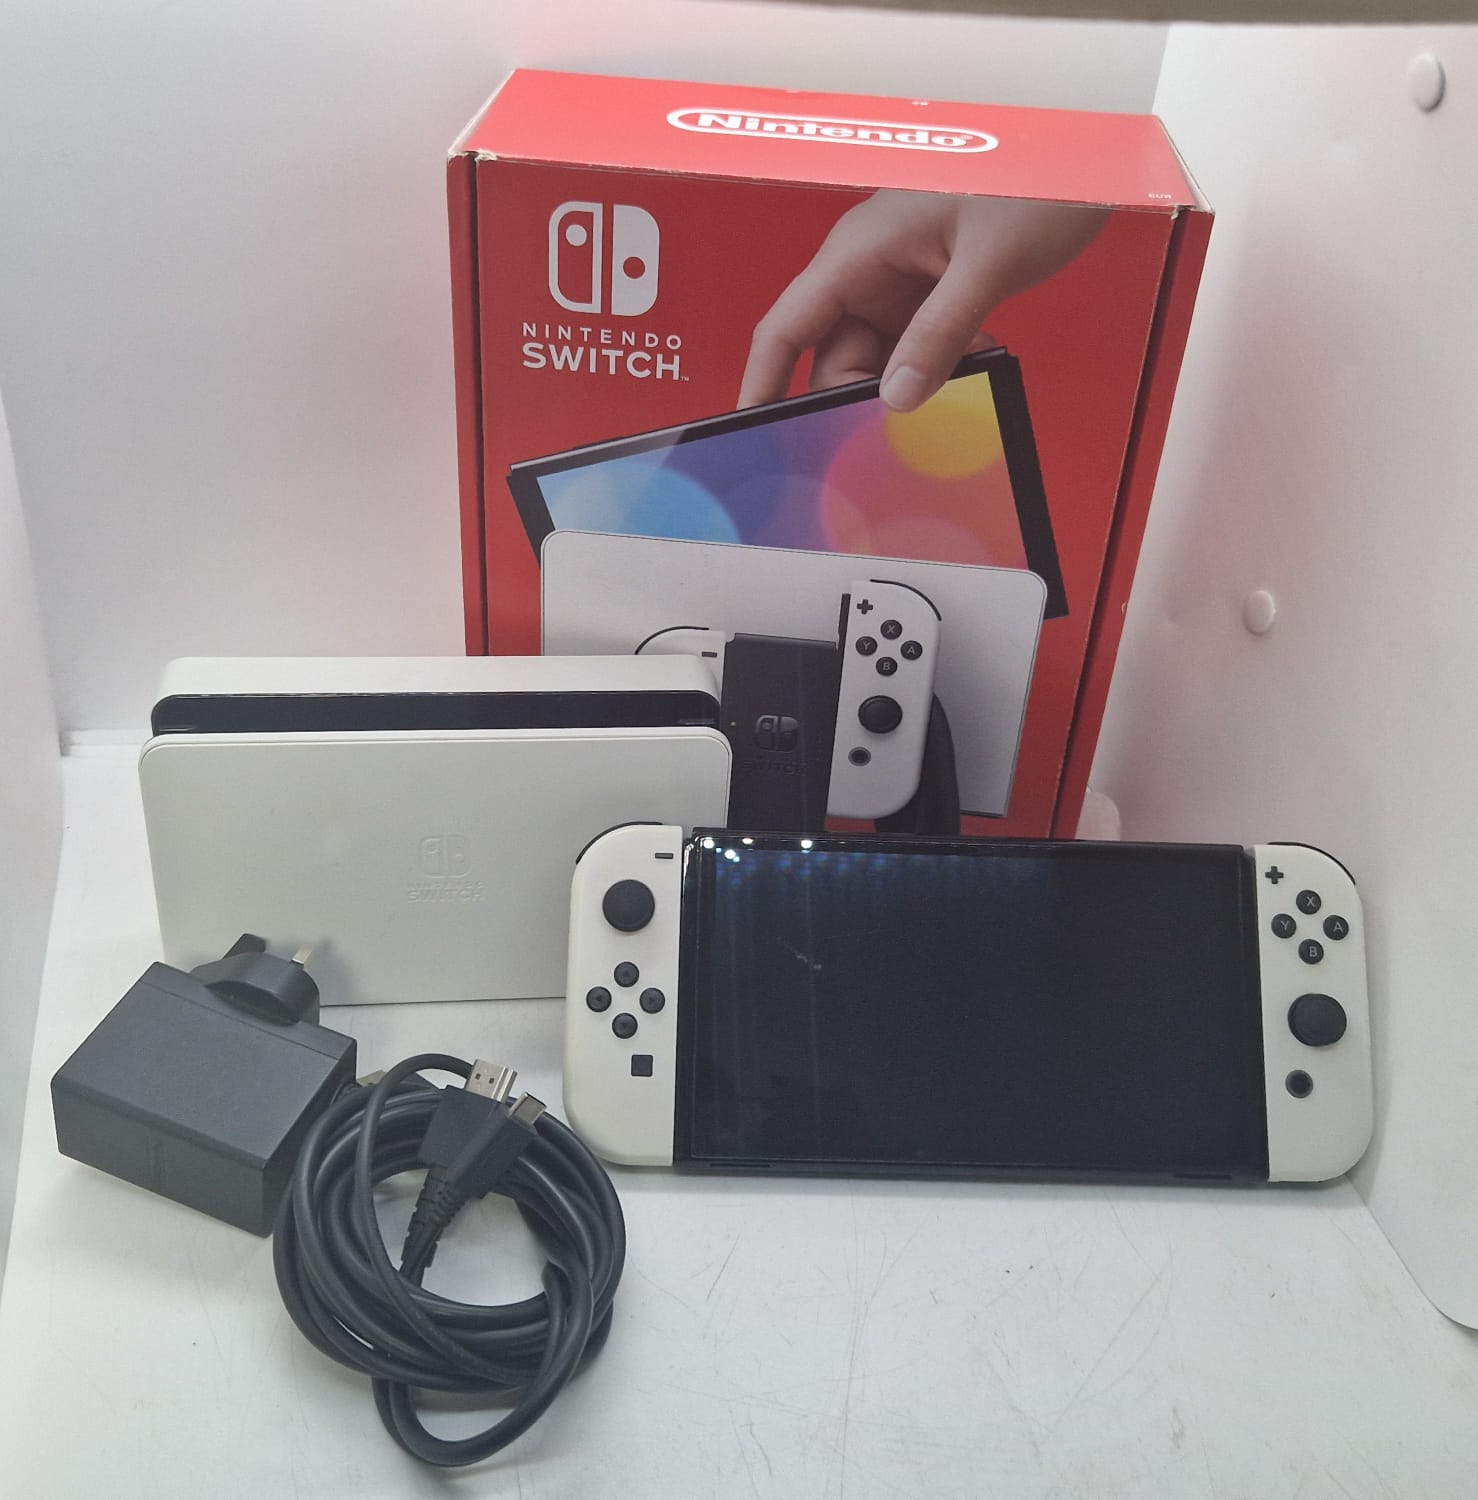 Nintendo Switch OLED Model HEG-001 Handheld Console - 64GB - White With A Box